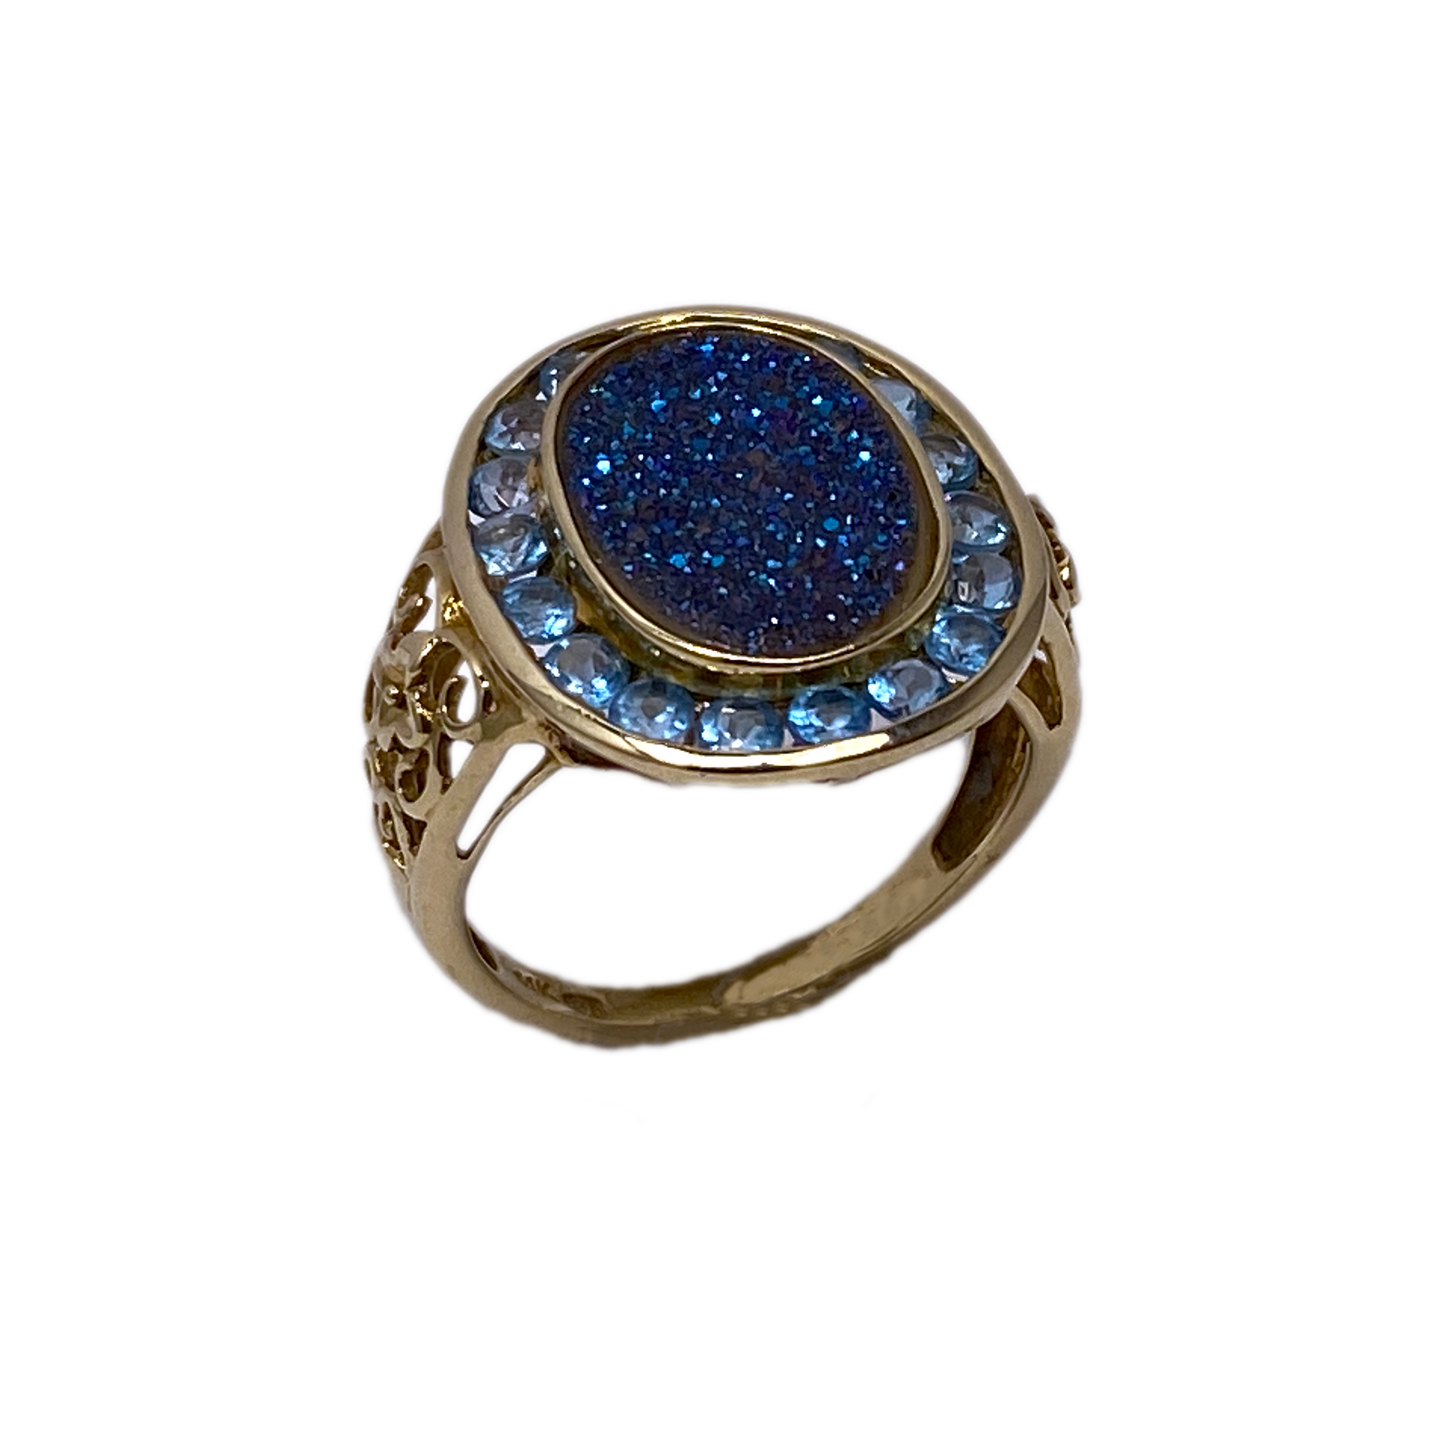 Vintage Dusty Quartz and Blue Topaz 14K Yellow Gold Ring